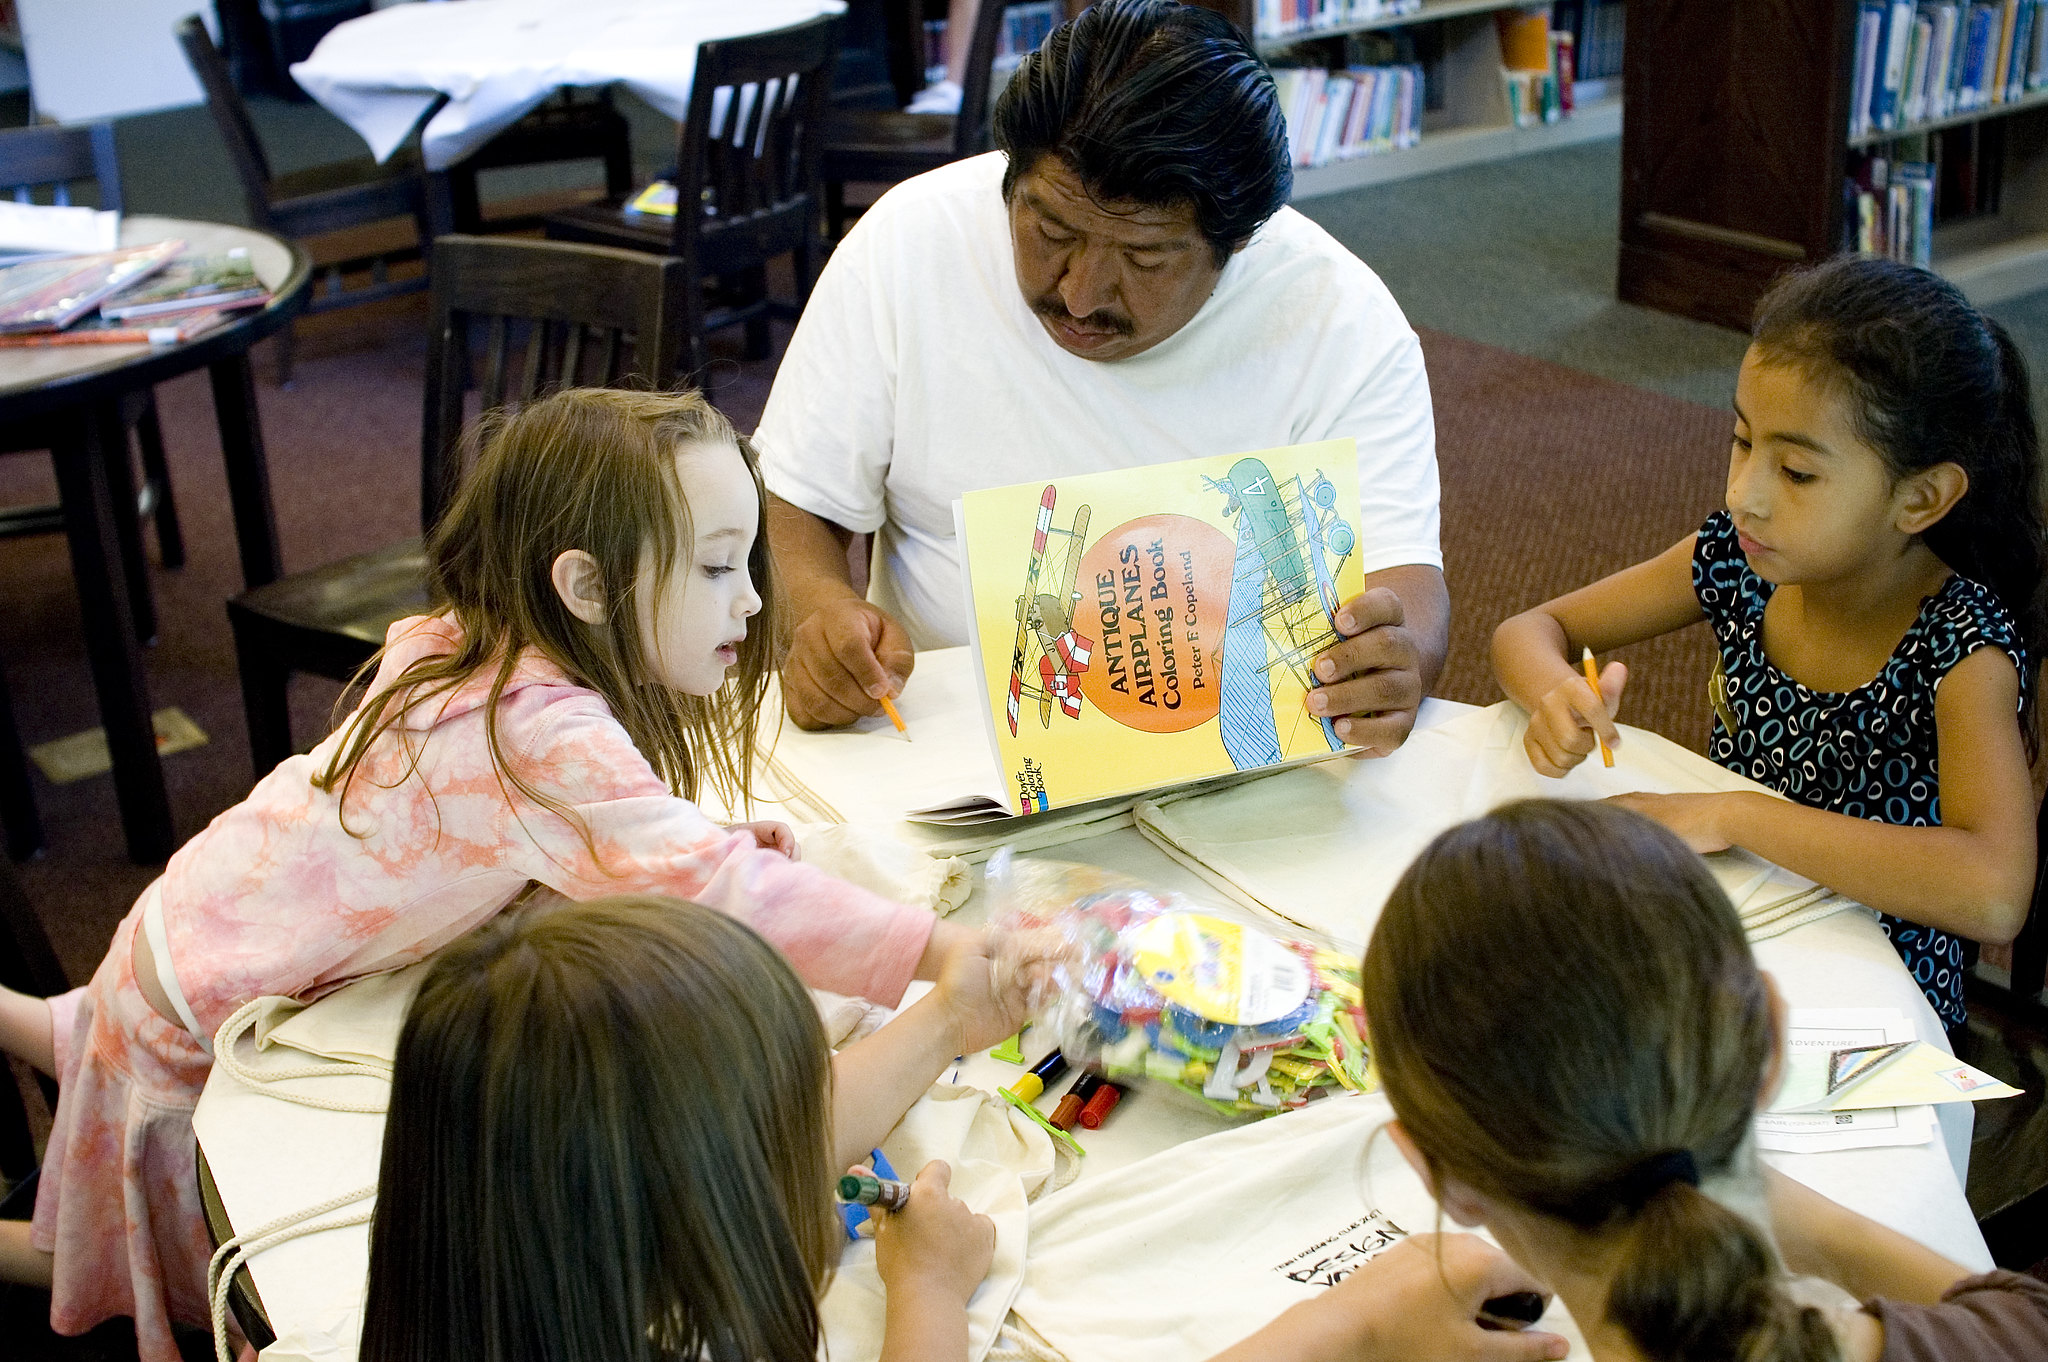 Man and a group of children seated together at a library table doing an art activity